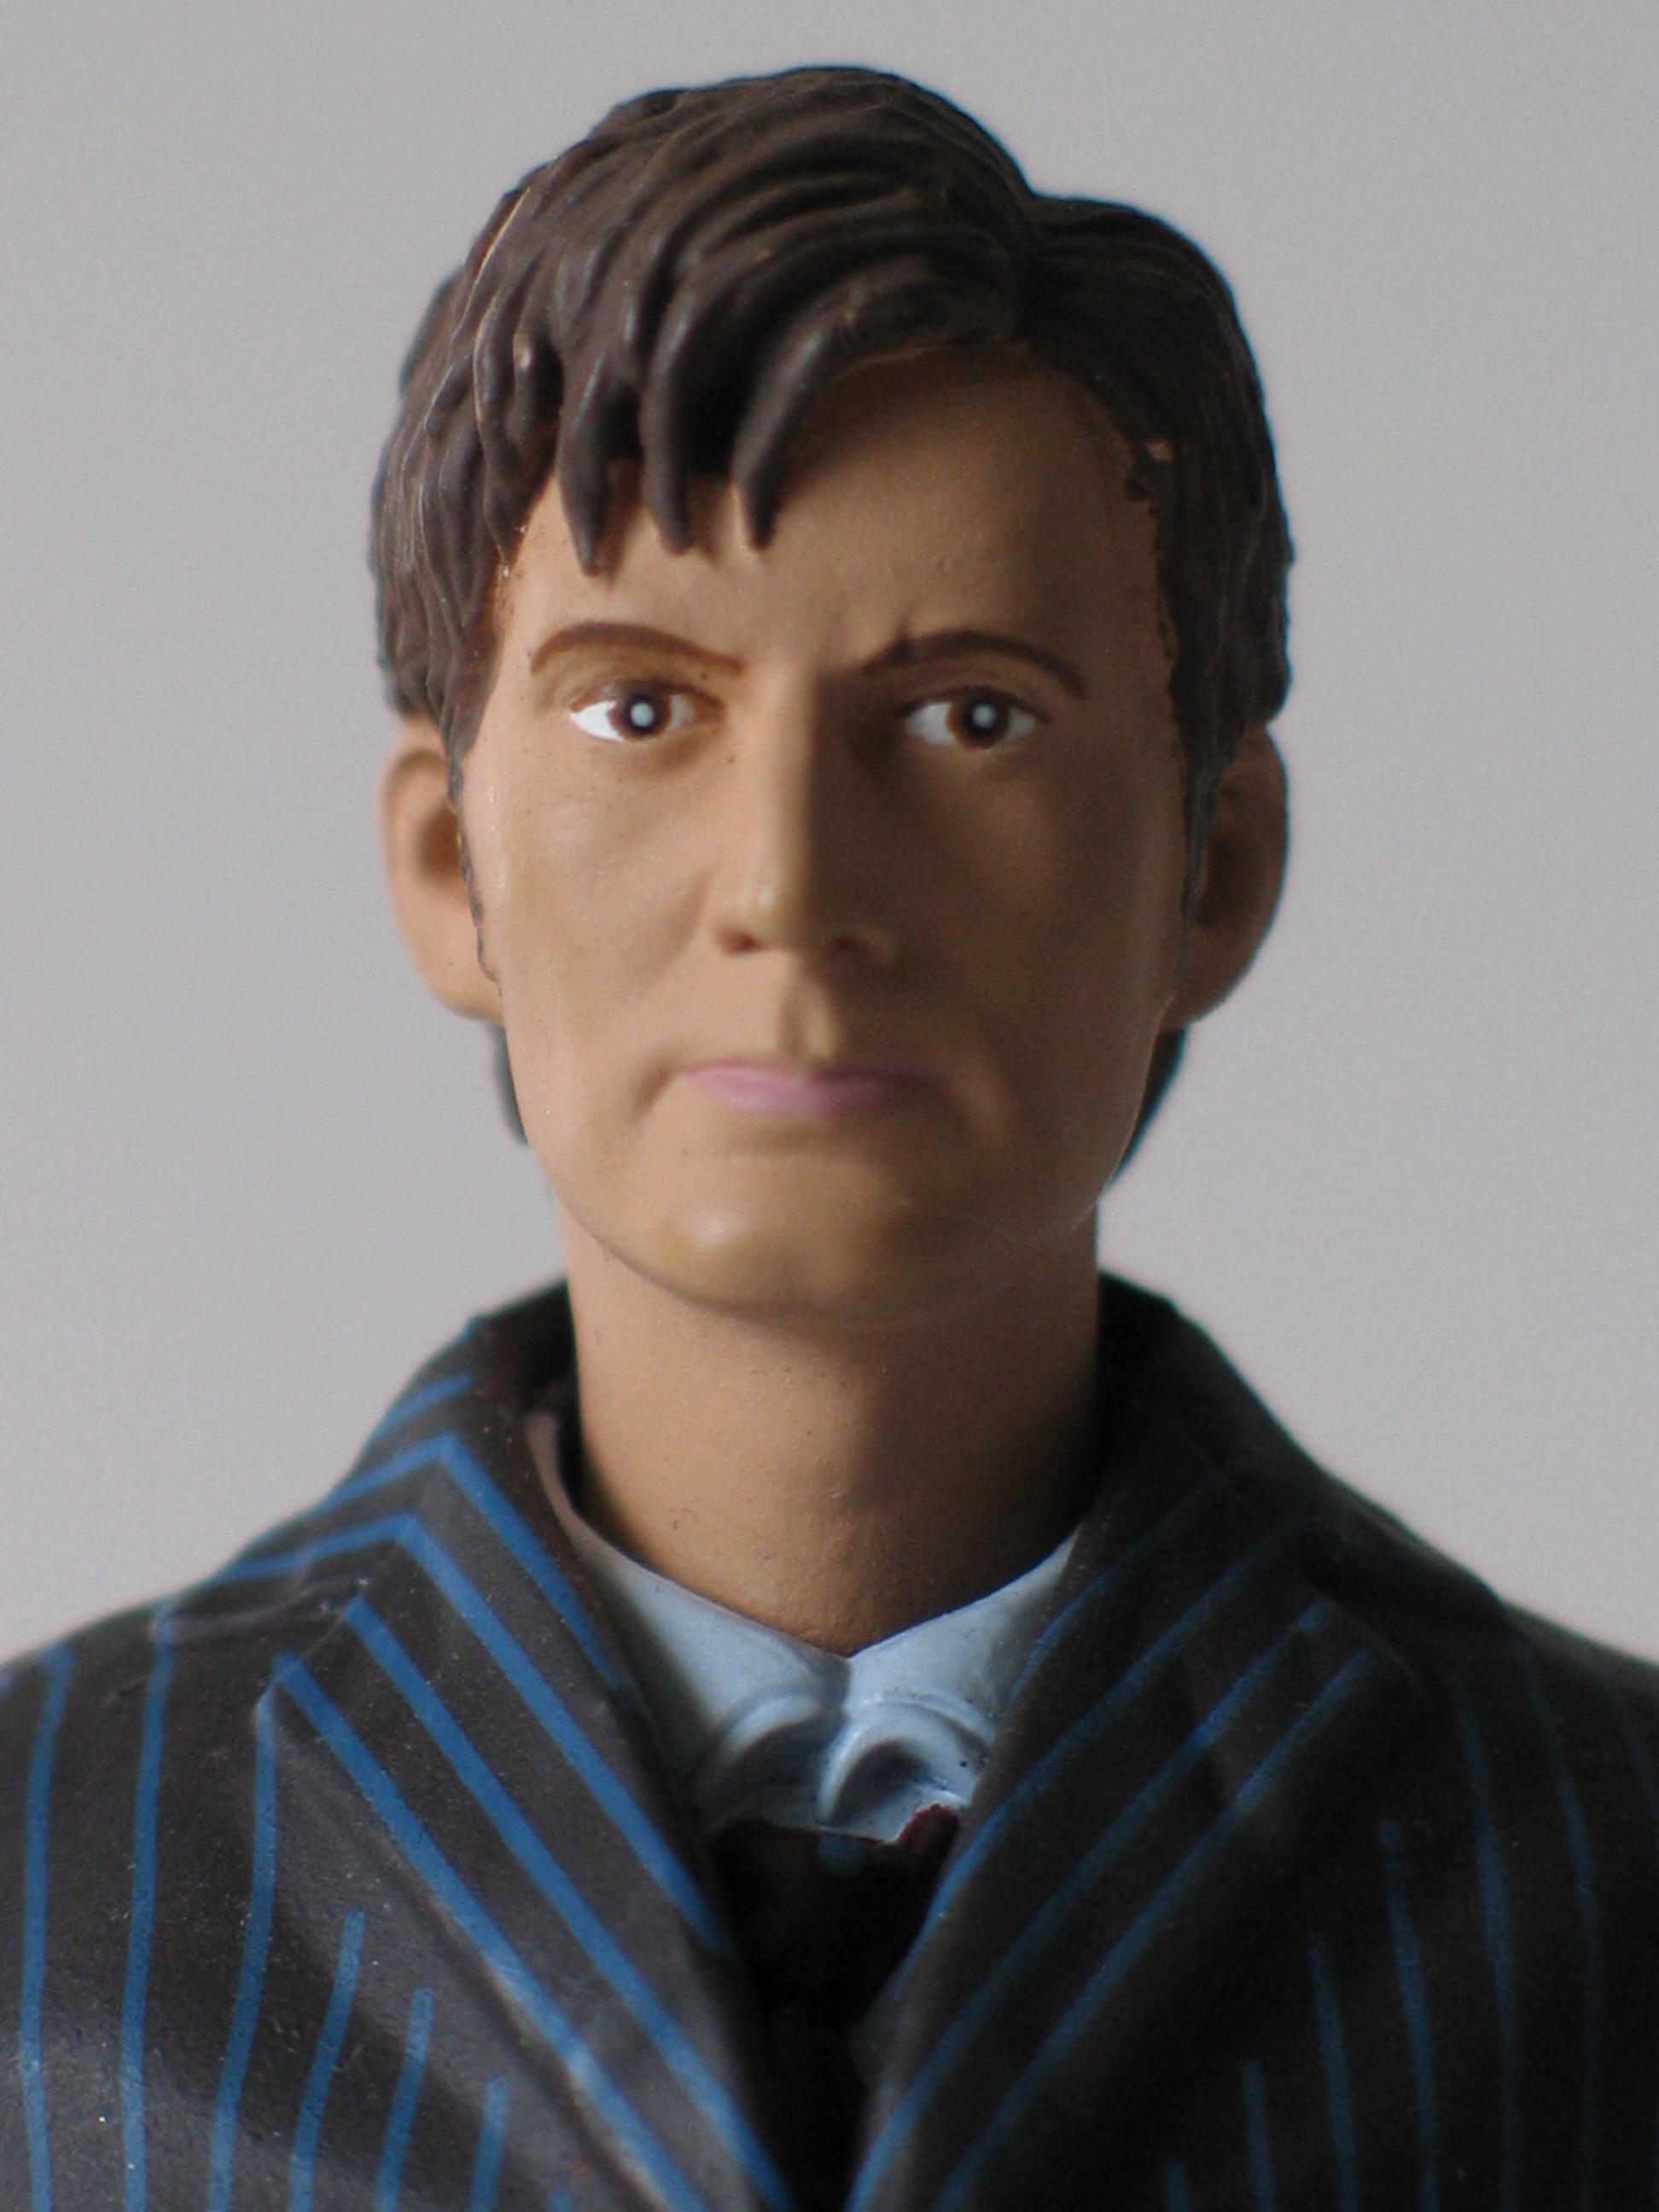 Details about   Doctor Who Tenth Doctor SDCC PX Variant